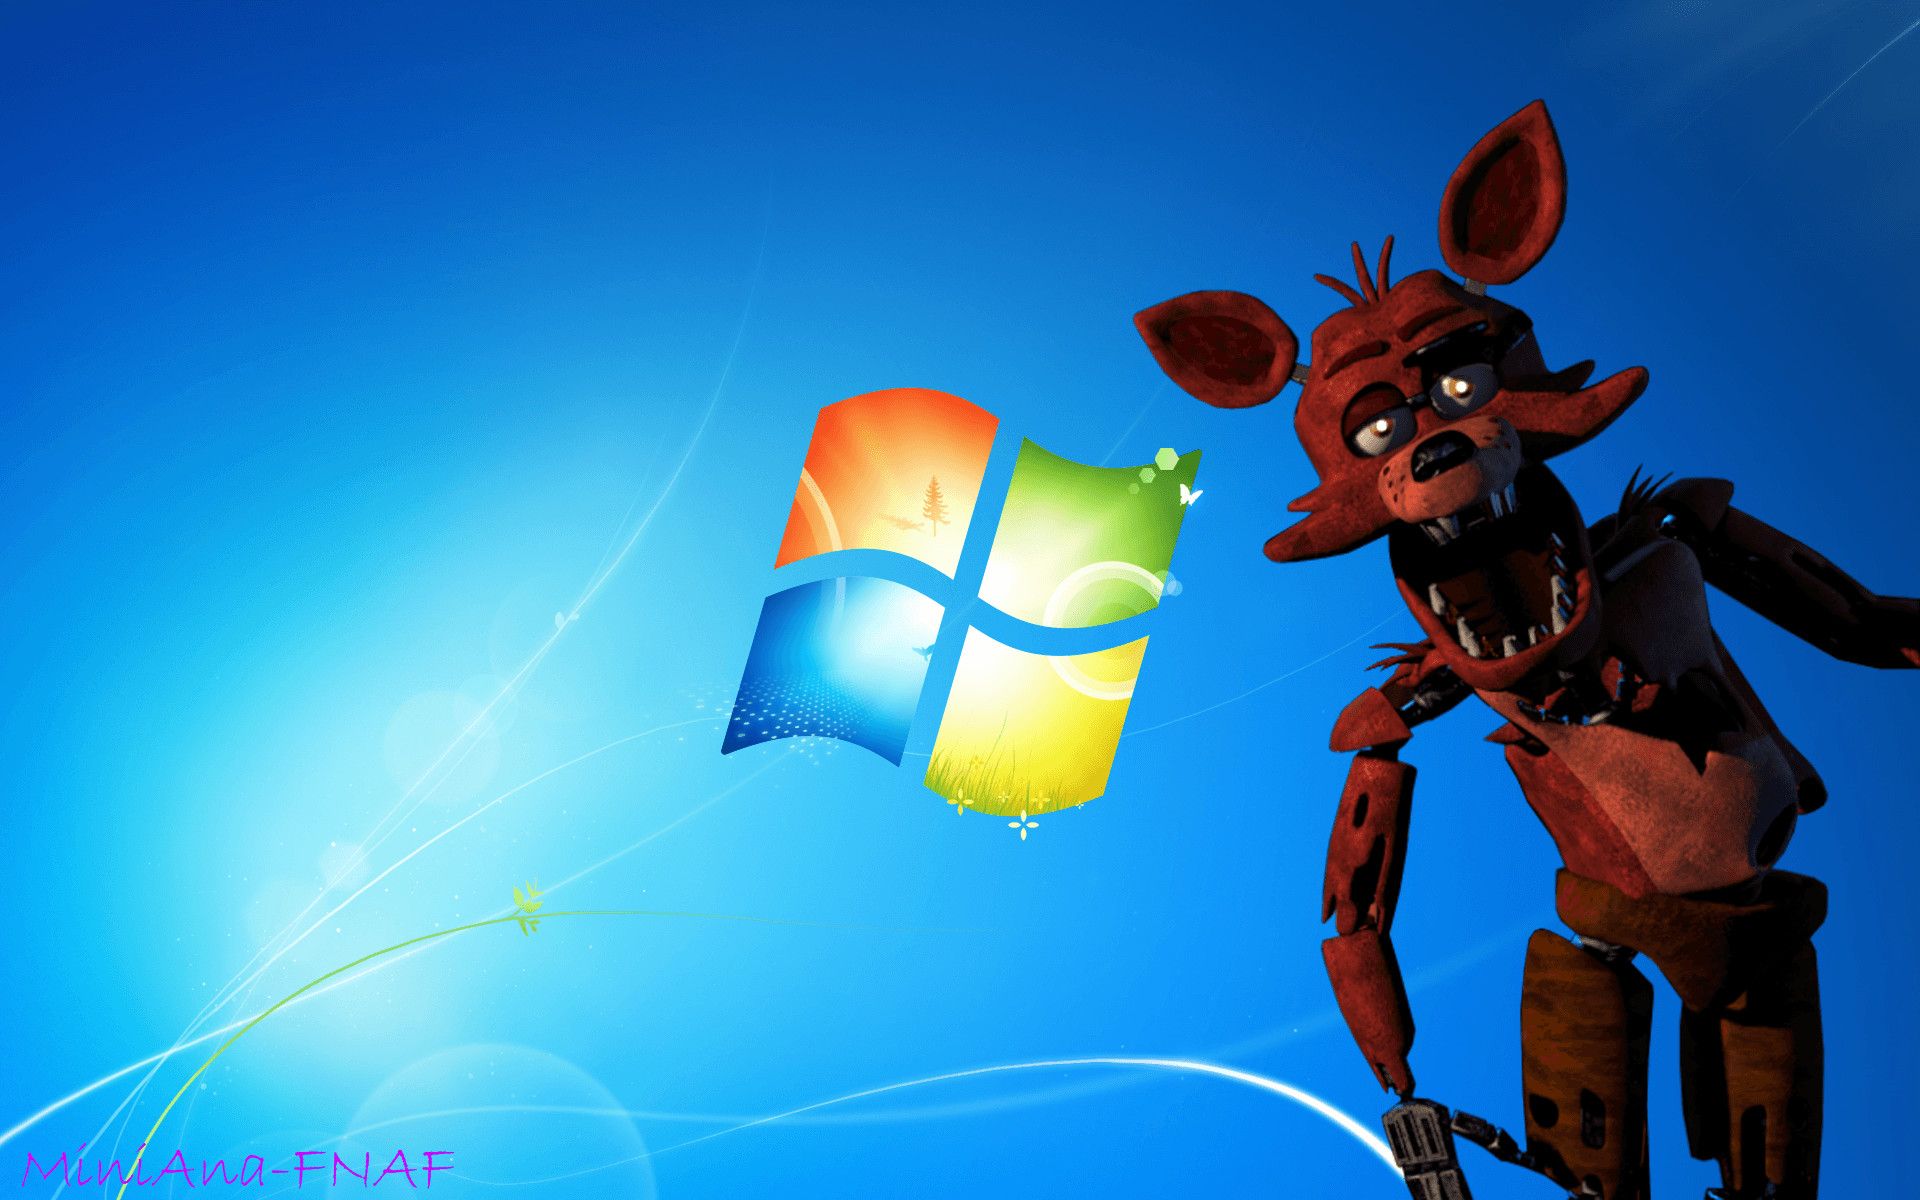 Five Nights at Freddy's wallpaper - Game wallpapers - #35600